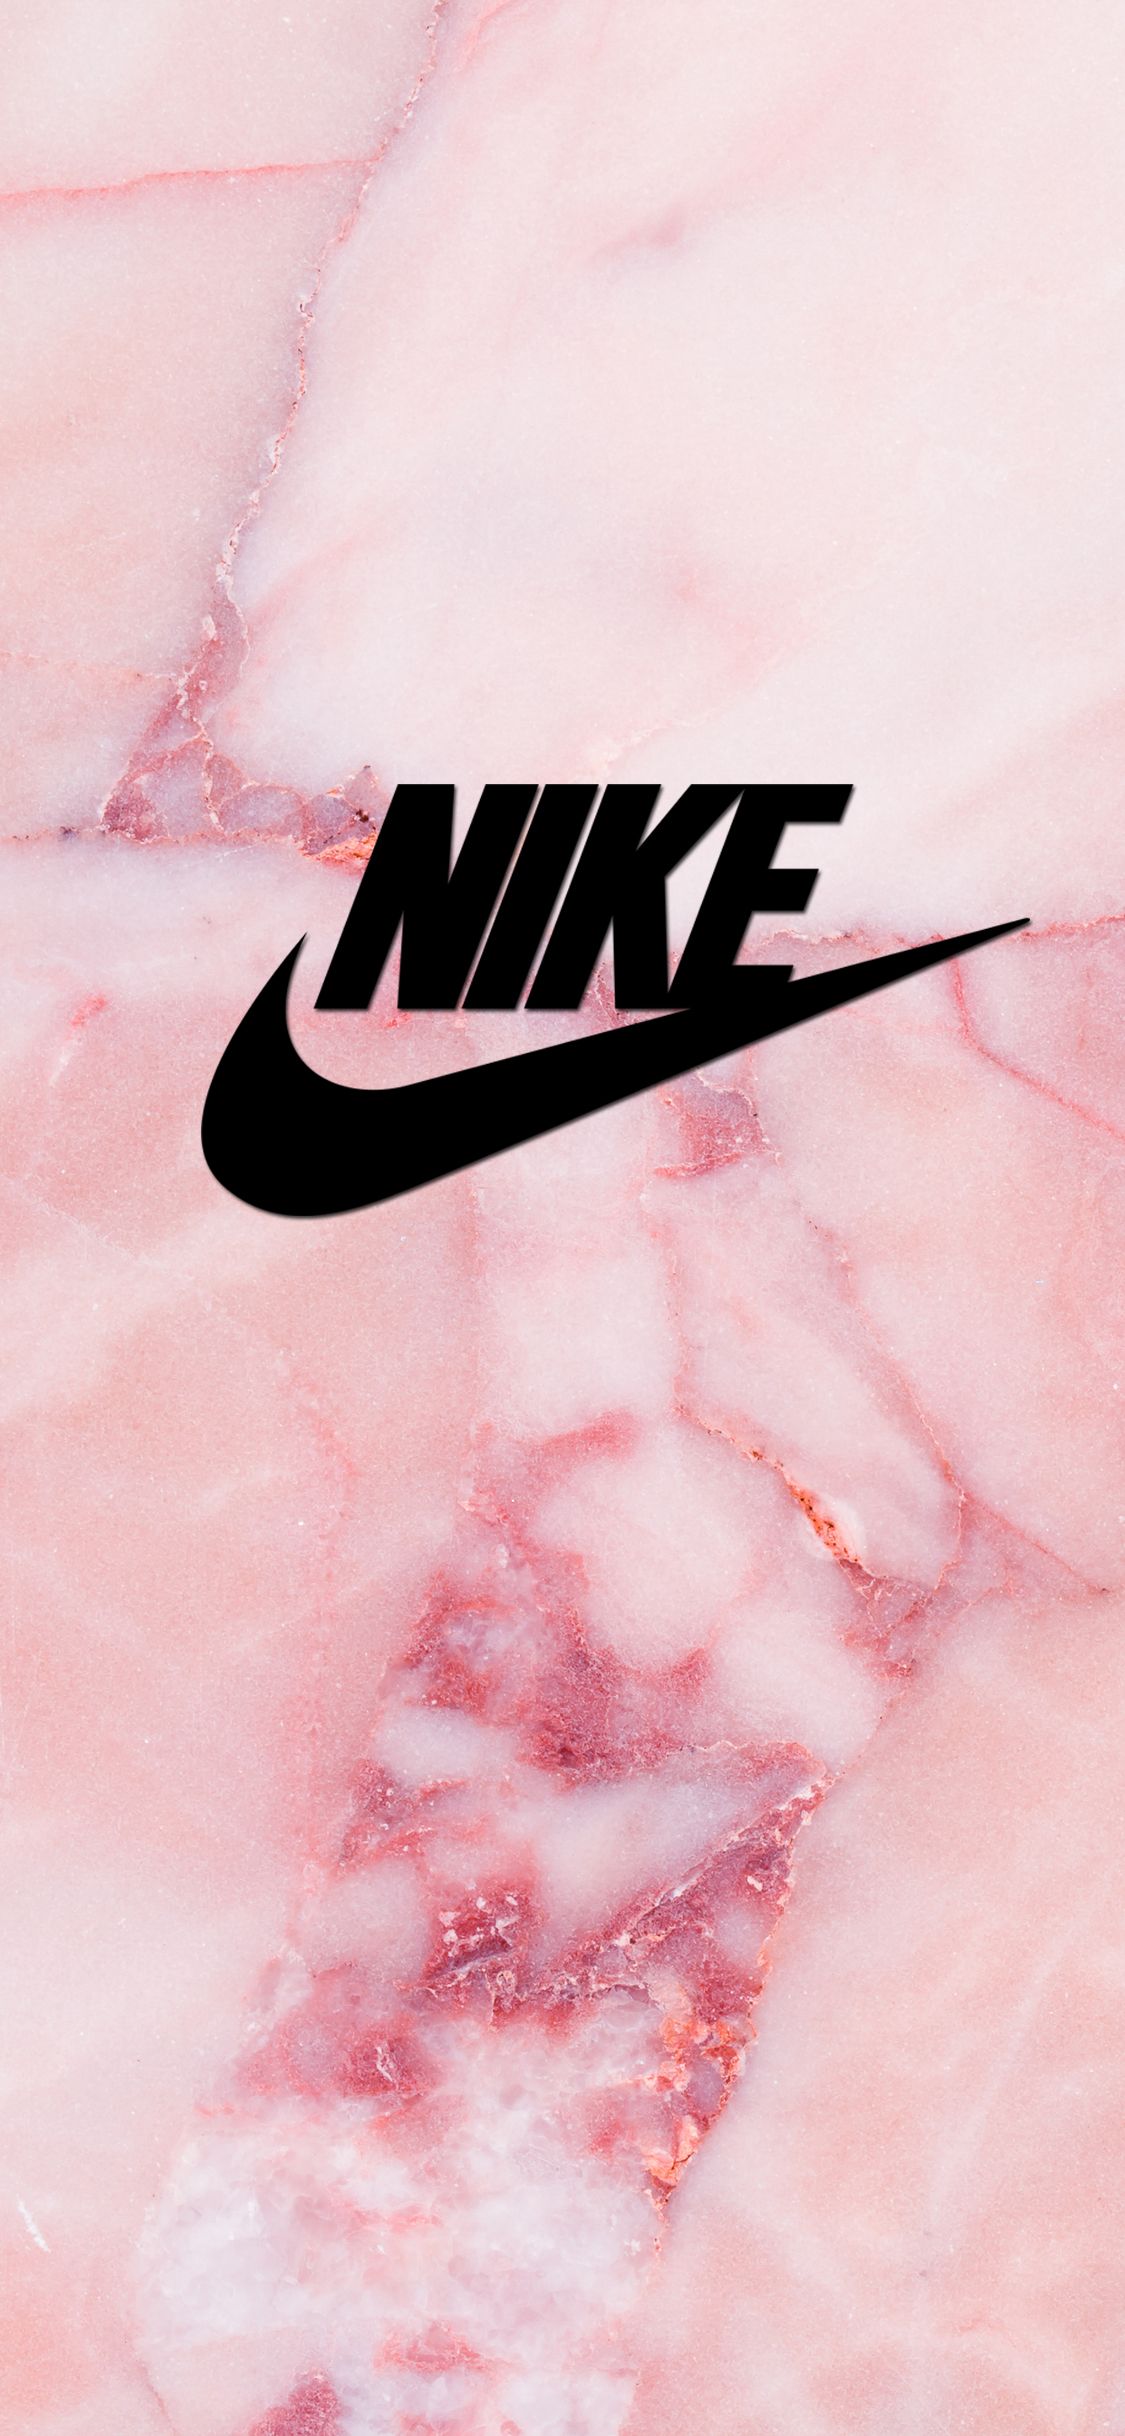 A close up of the nike logo on marble - Nike